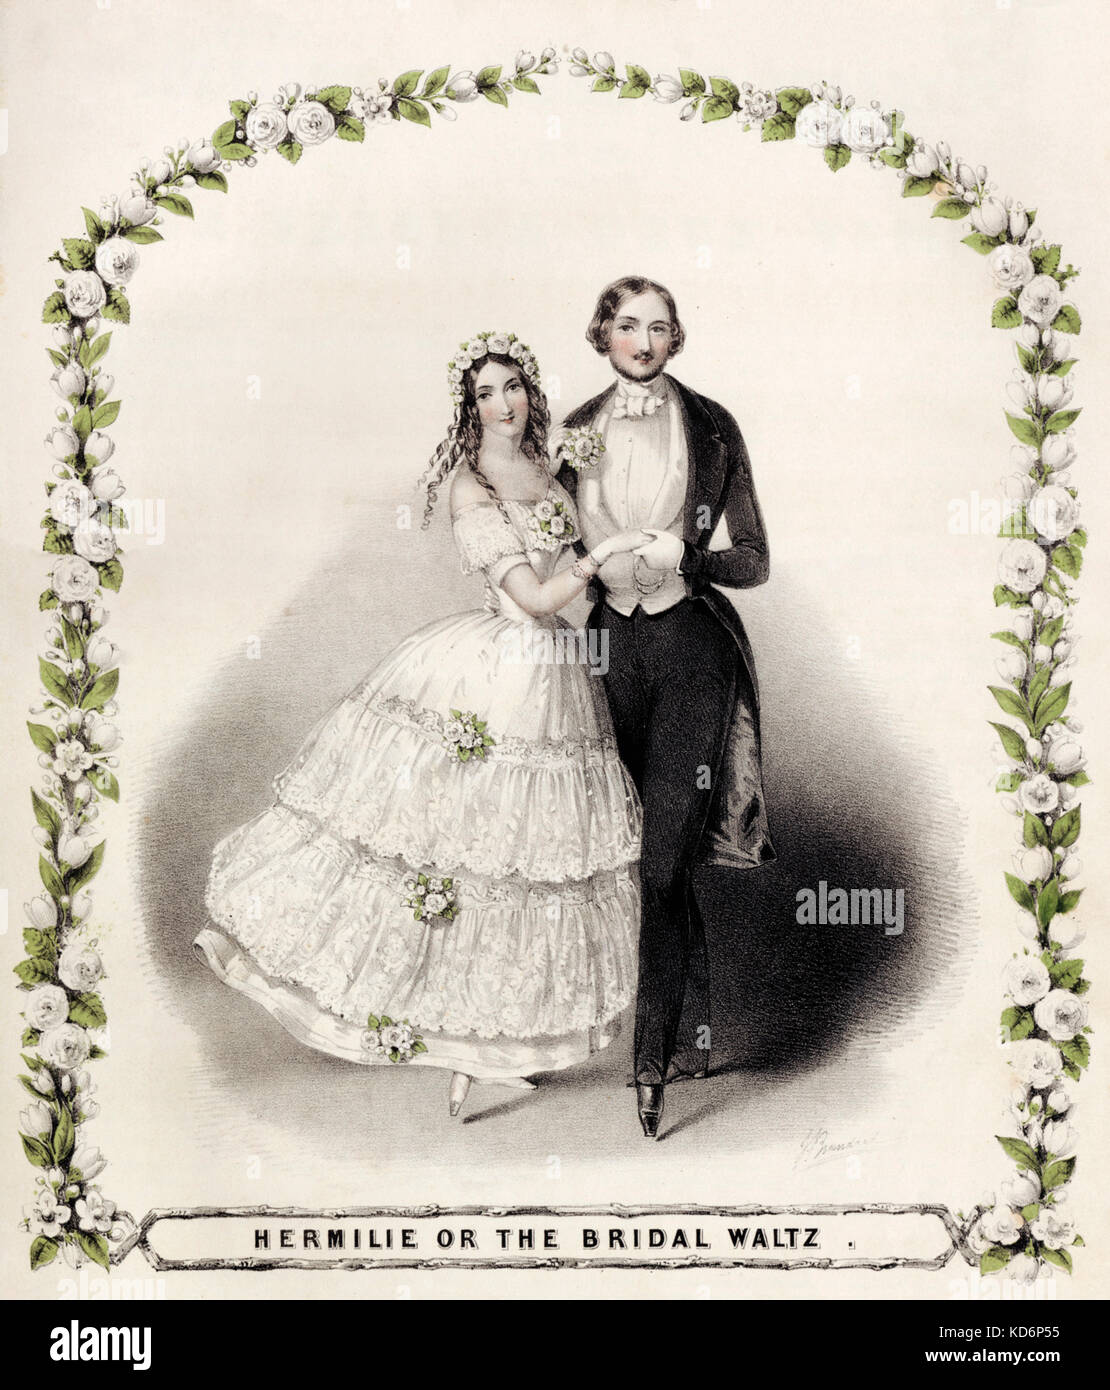 Queen Victoria and Prince Albert wedding dance. Called 'Hermilie or the Bridal Waltz' because disrespectful to refer directly to the Queen.Published, London, Julien, before 1846 - around time of Victoria 's accession to the throne of England.  Illustration by J. Brandard. J'Julien's celebrated valses a deux tems, 2nd set.' Shows steps. Stock Photo